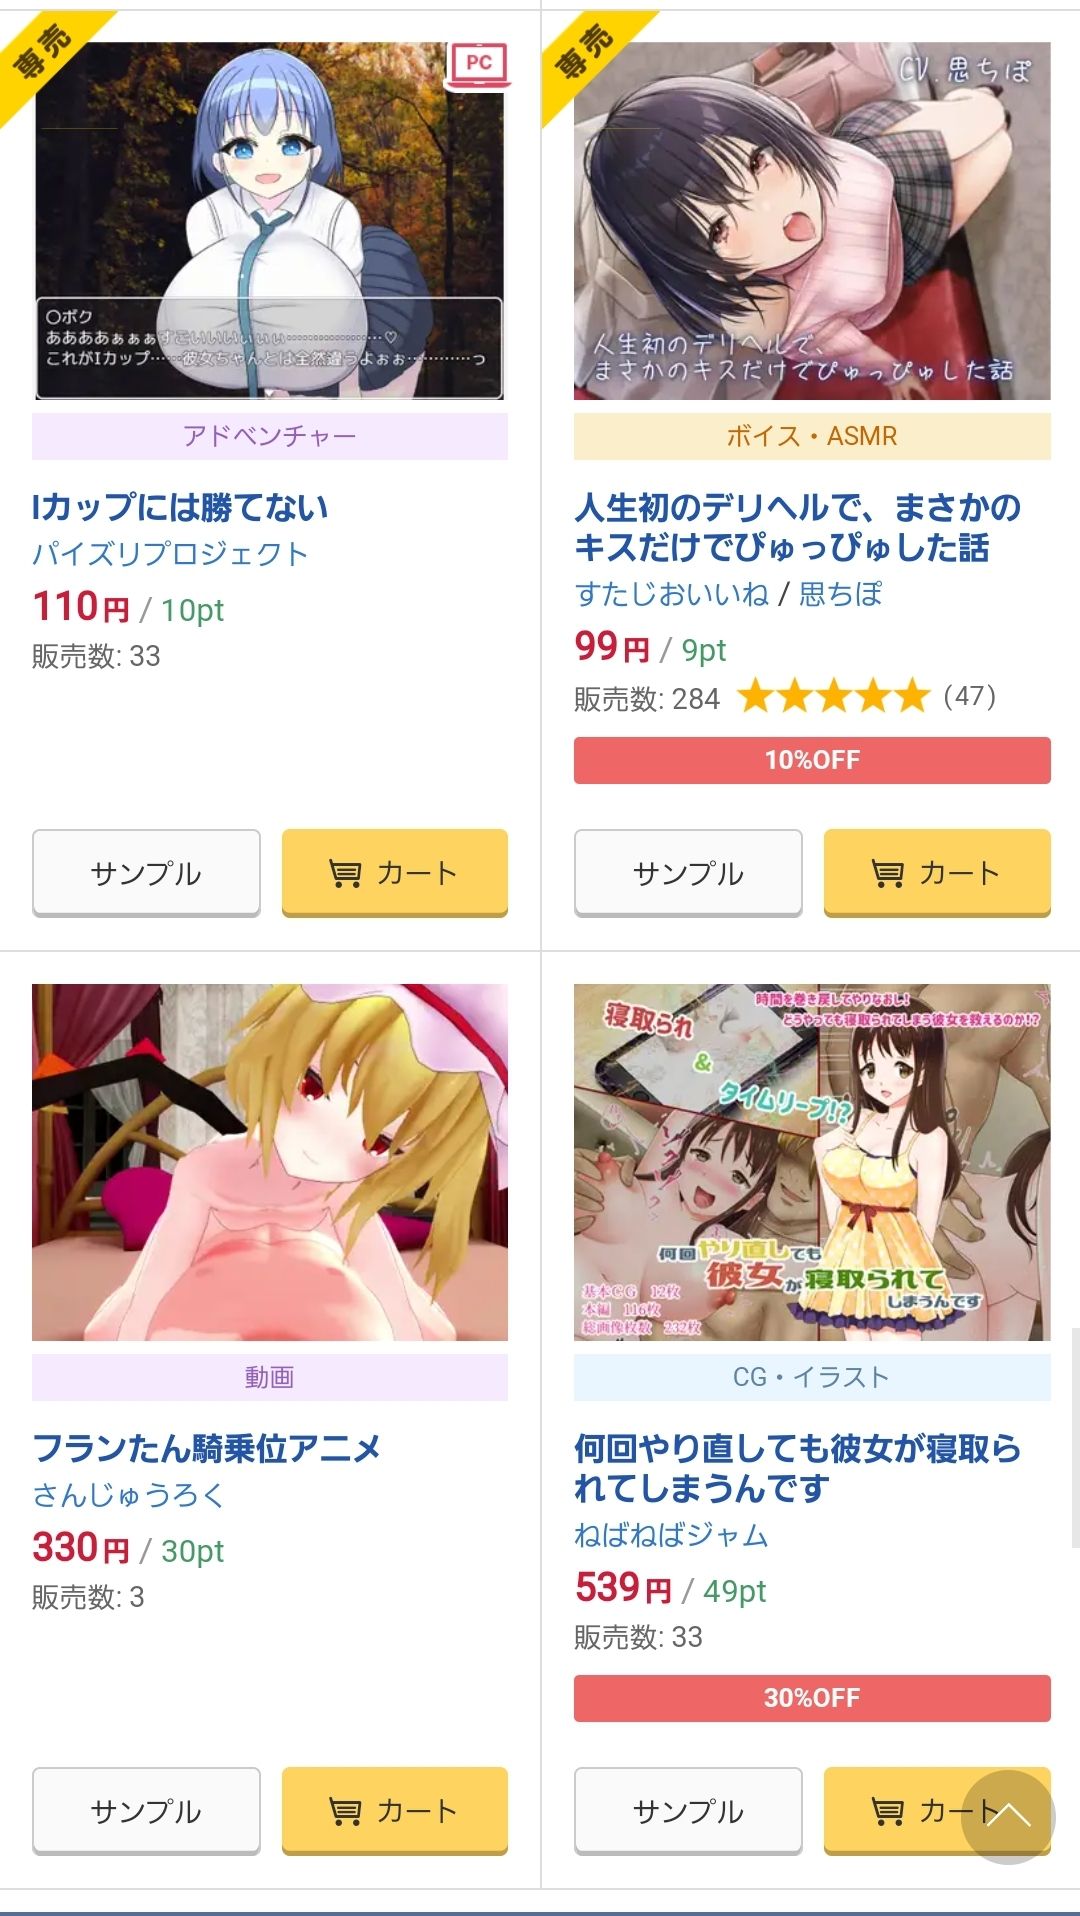 【Good news】Doujin eroge, it turns out that the painting can sell even if it is 5